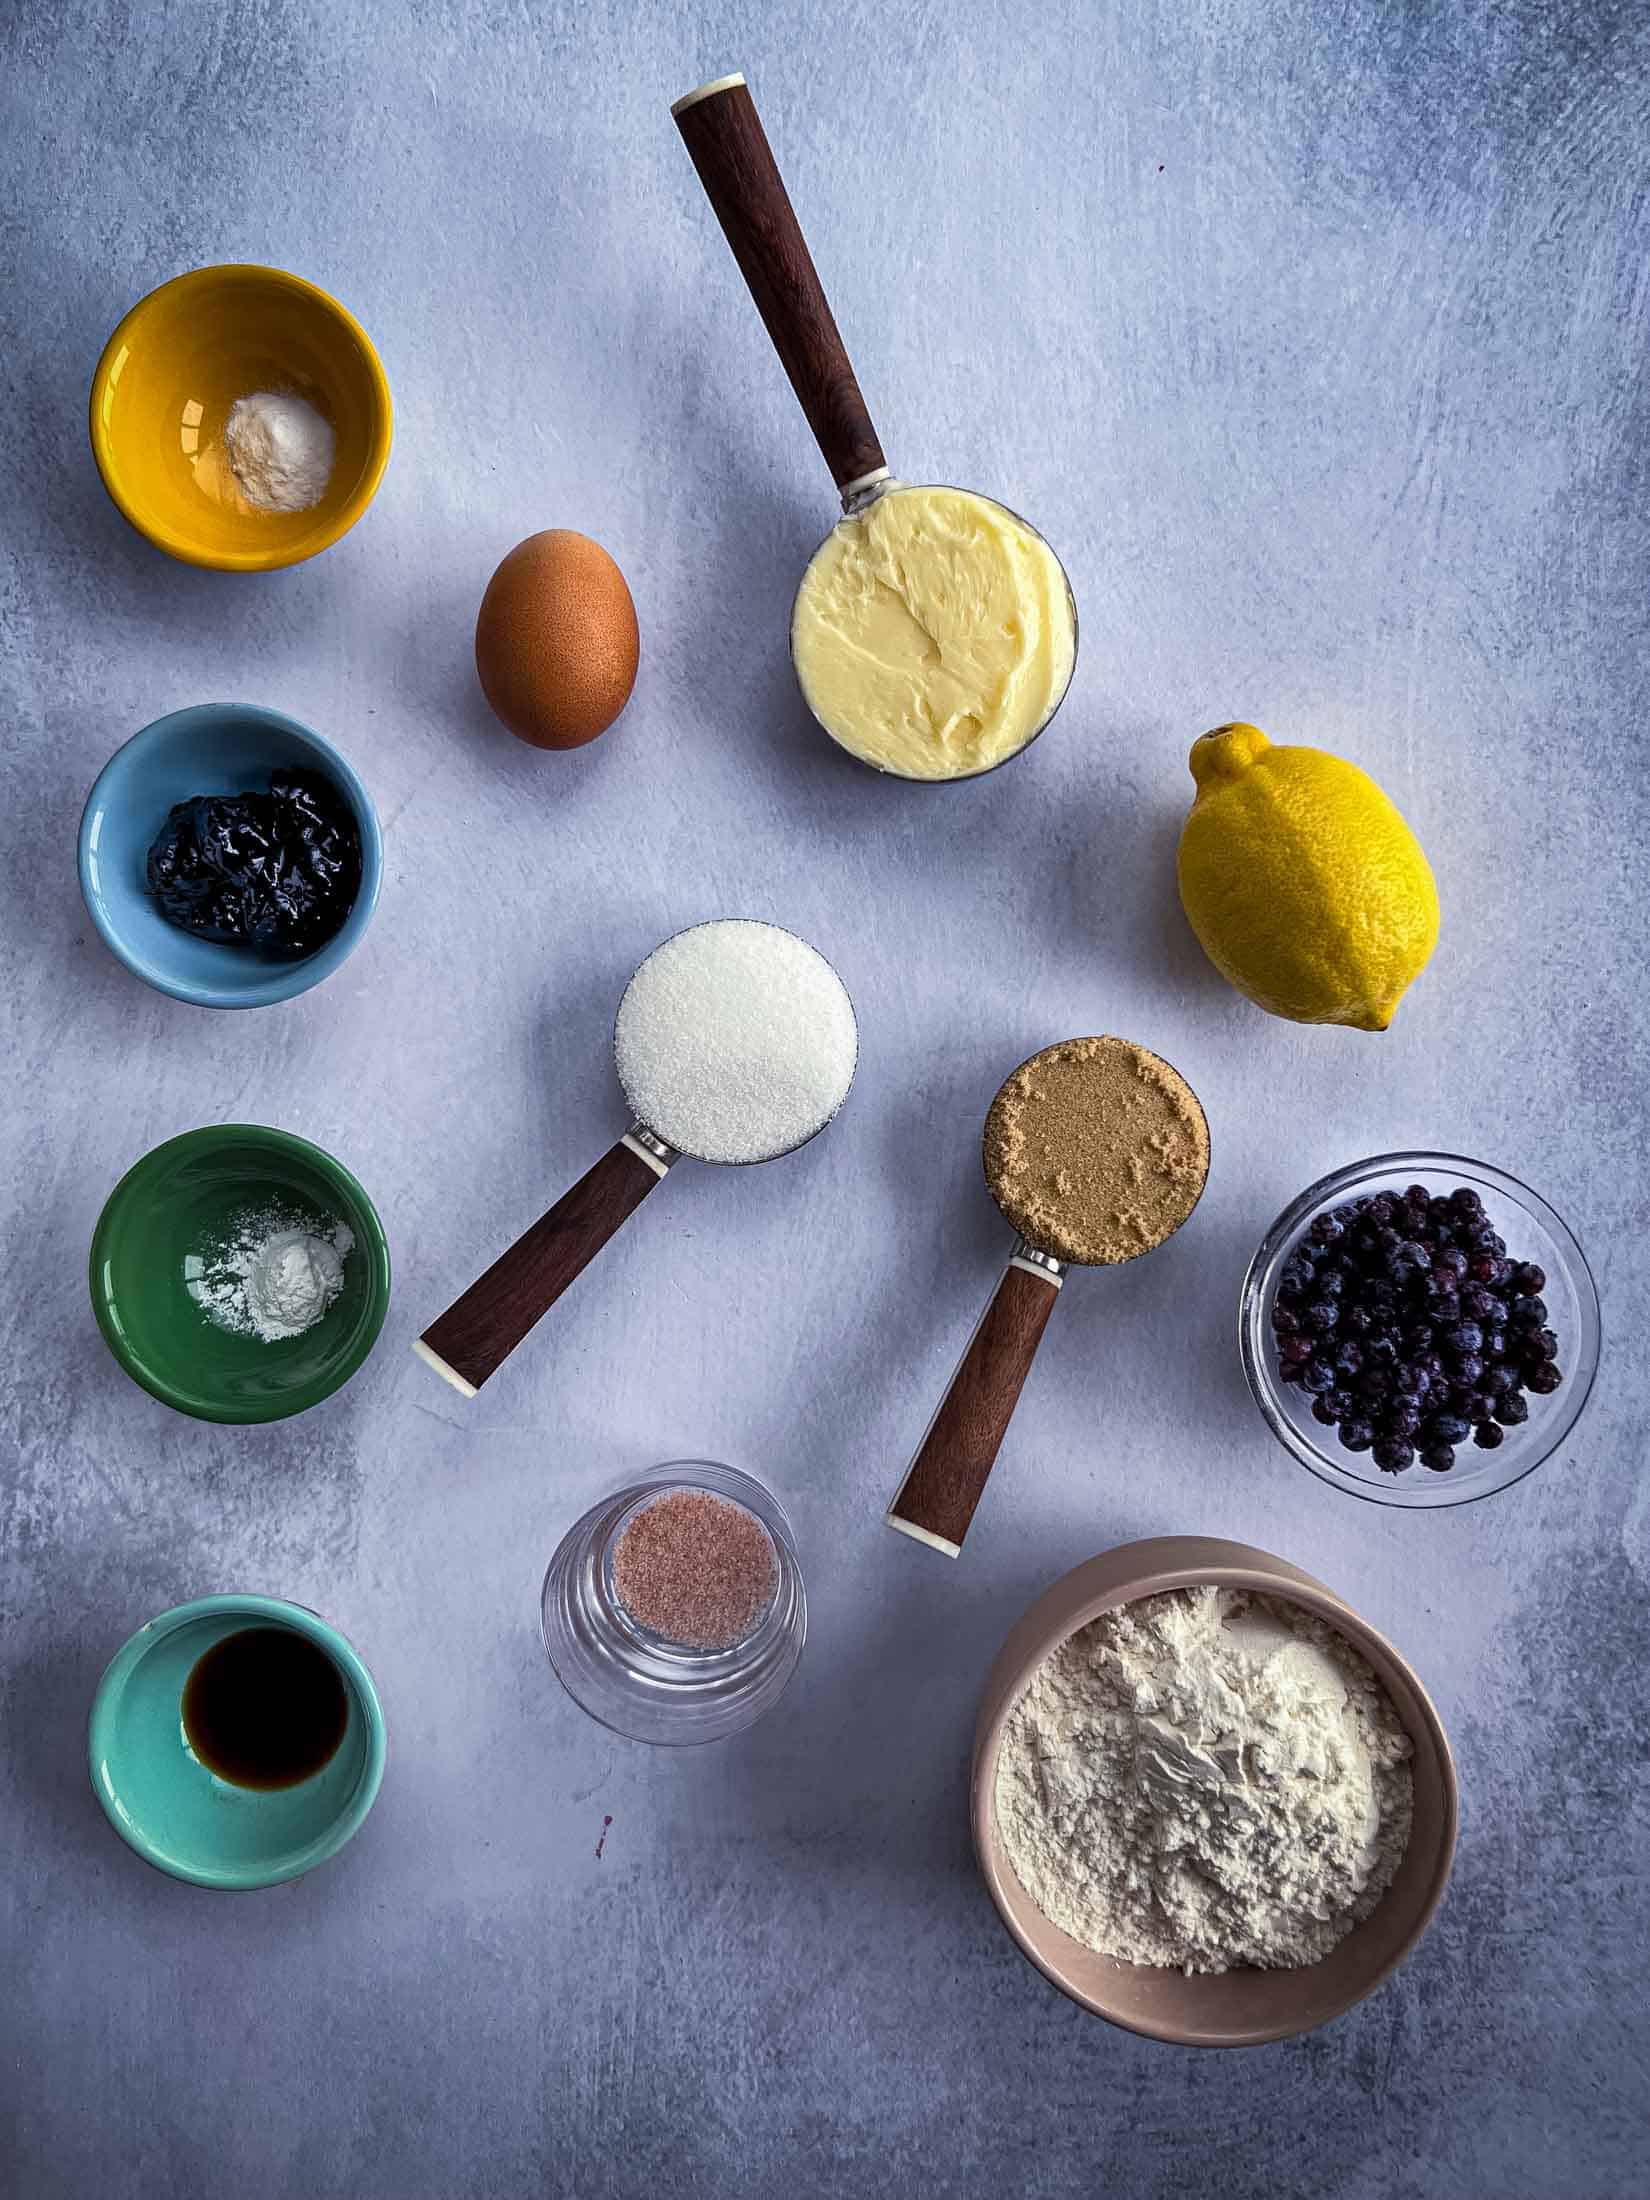 Key ingredients for lemon blueberry cookies with fresh berries, a whole lemon, dry ingredients and wet ingredients.